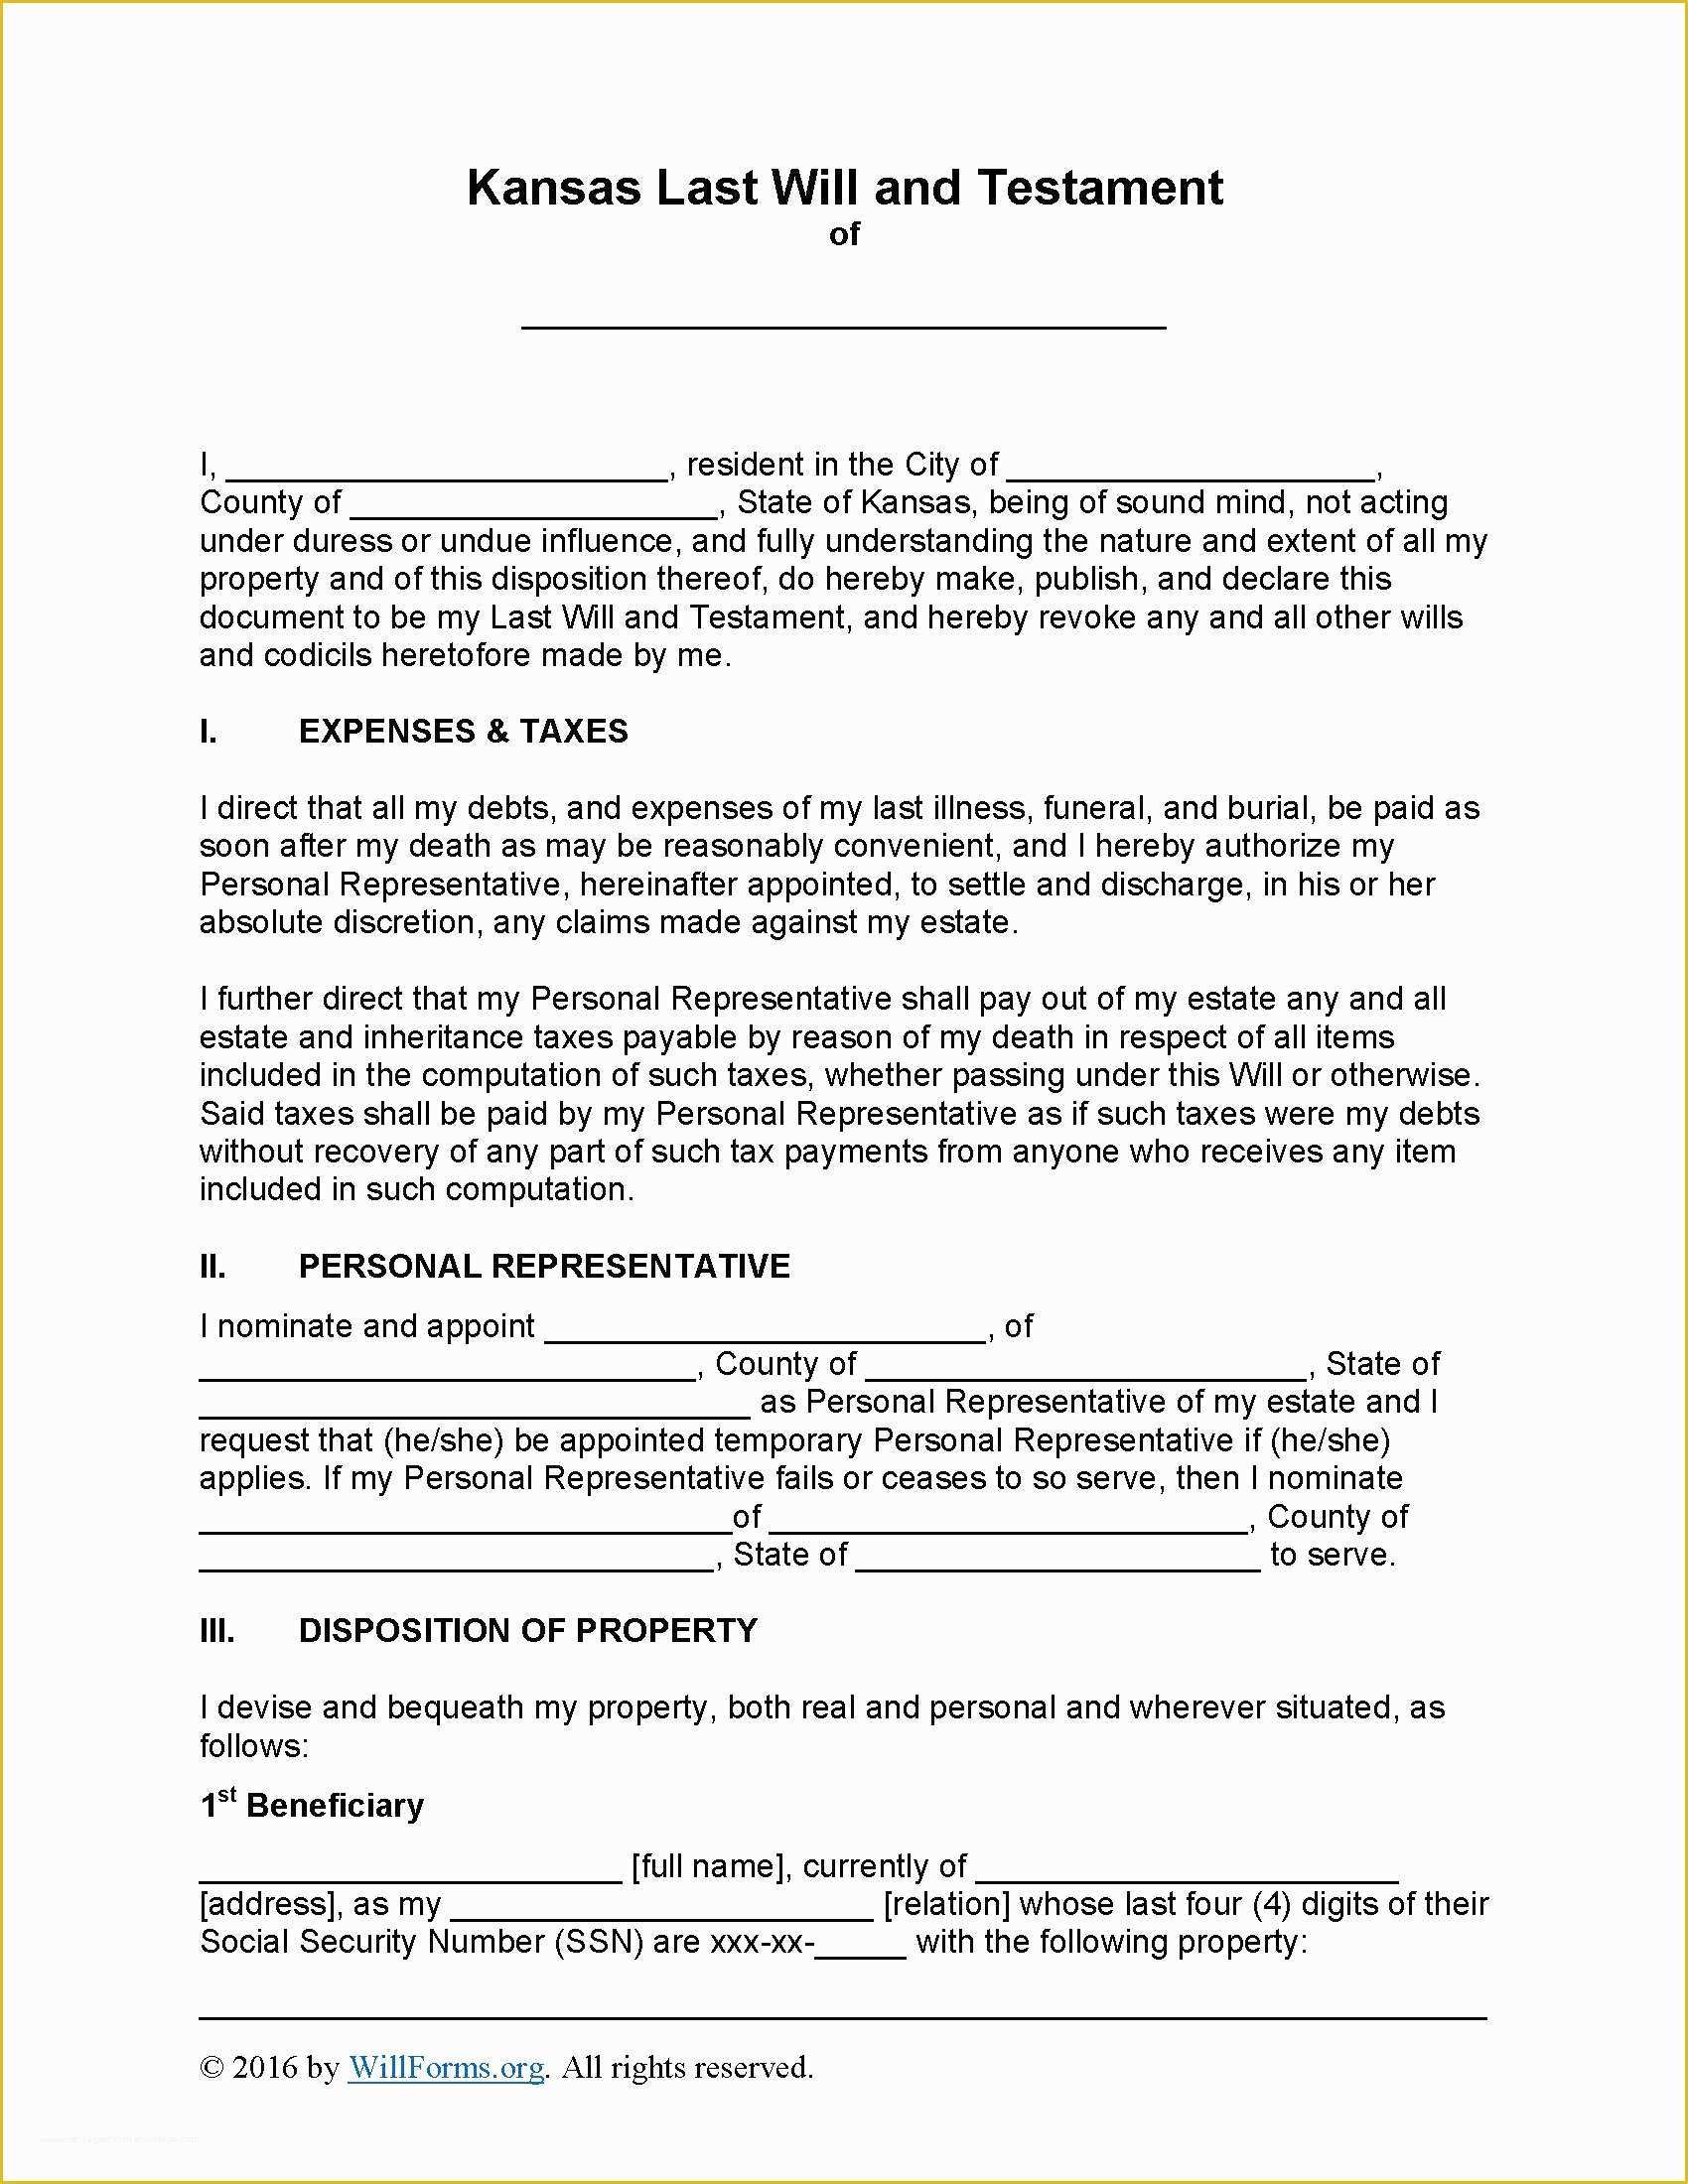 Free Will Writing Template Of Kansas Last Will and Testament form Will forms Will forms